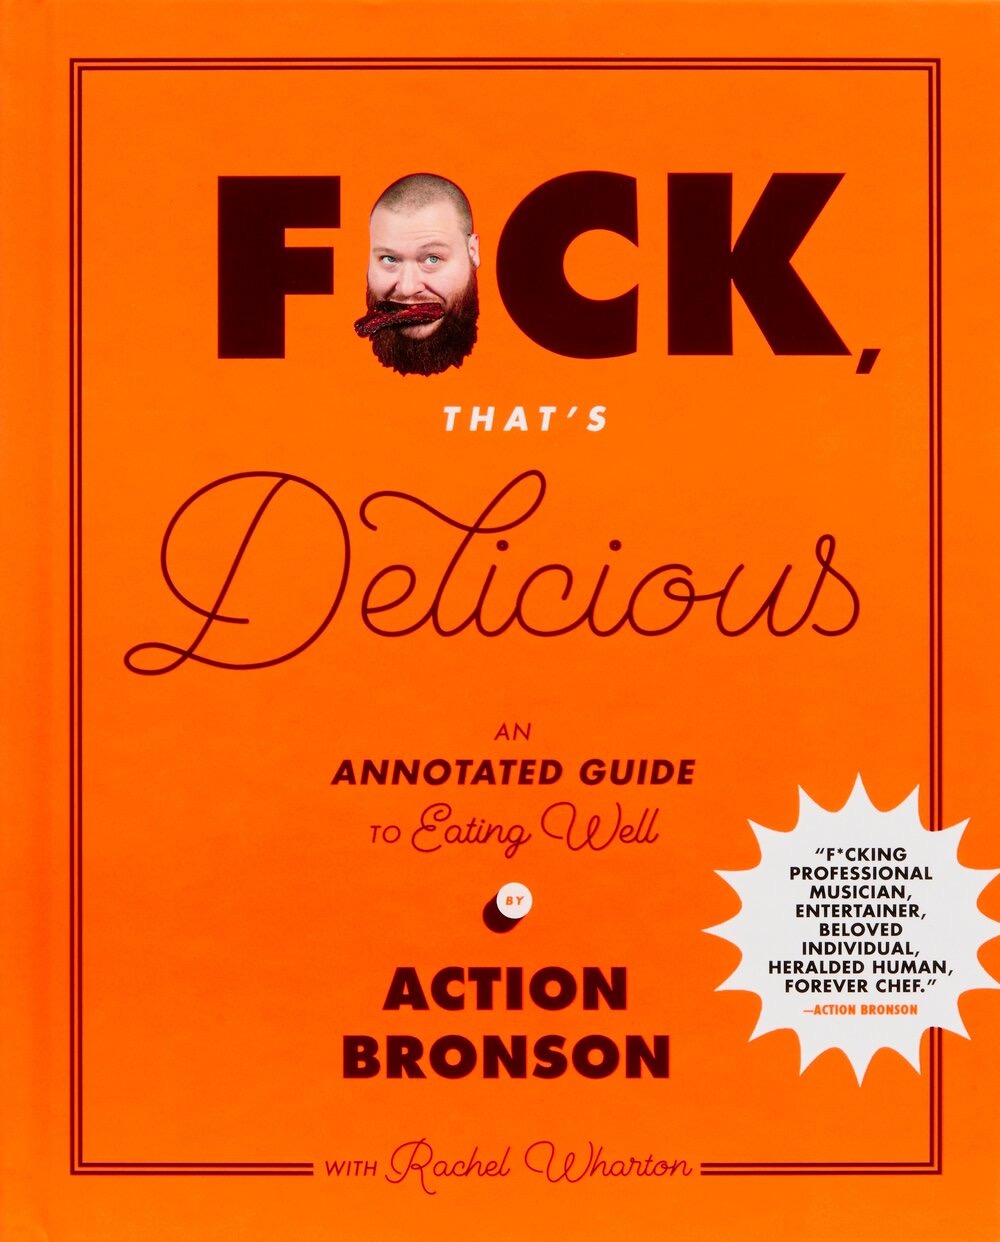 book cover with the word 'f*ck' in the title